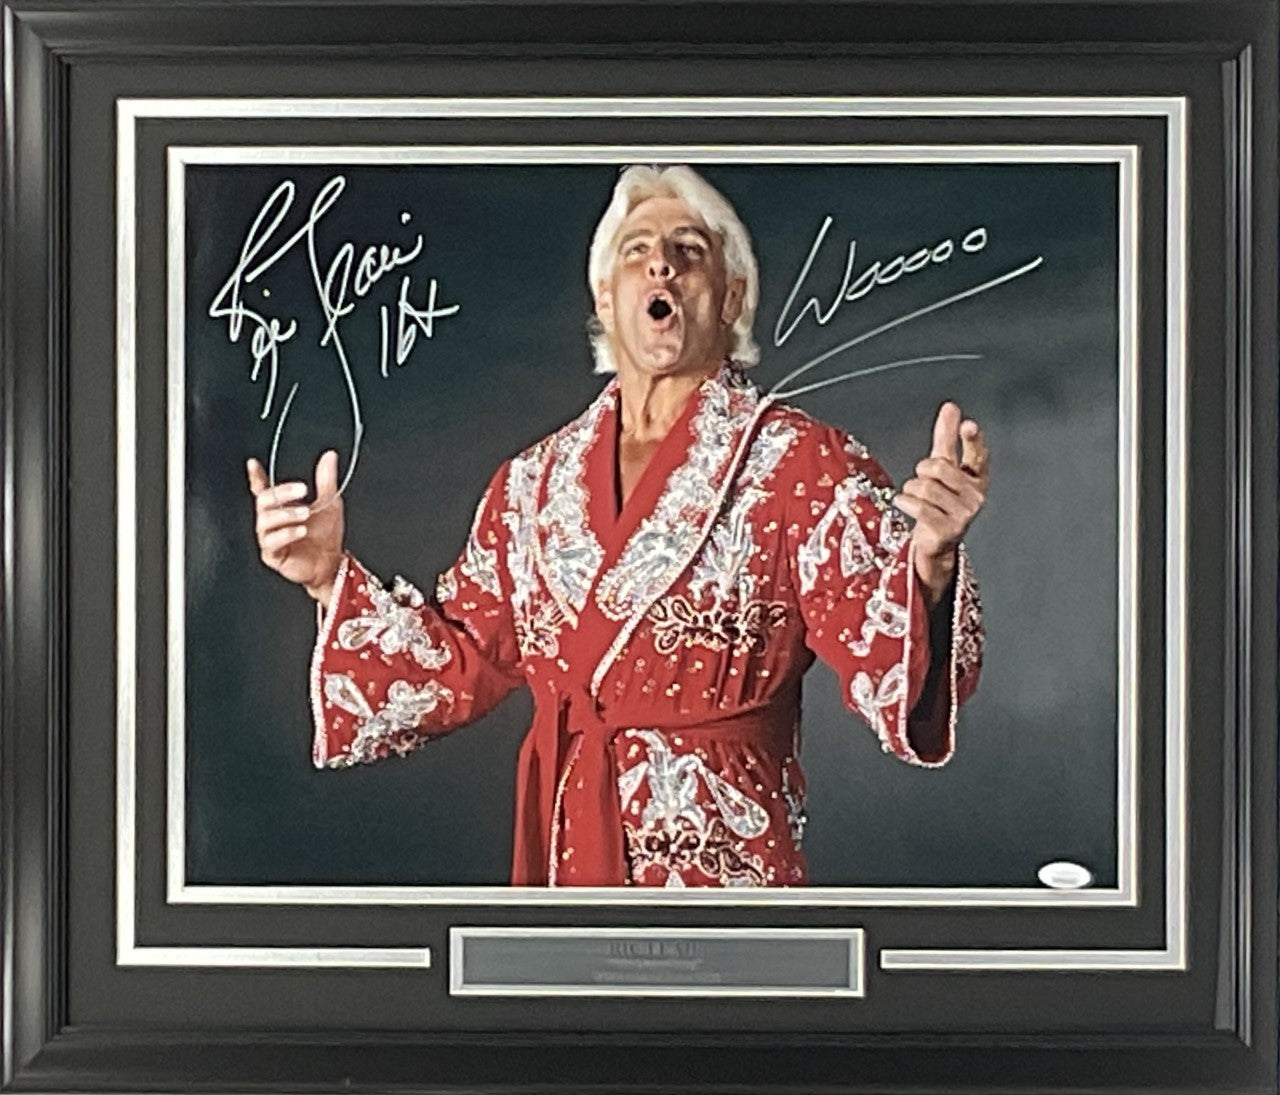 Ric Flair Autographed 16x20 Inscribed "16X & Woooo" Photo Framed